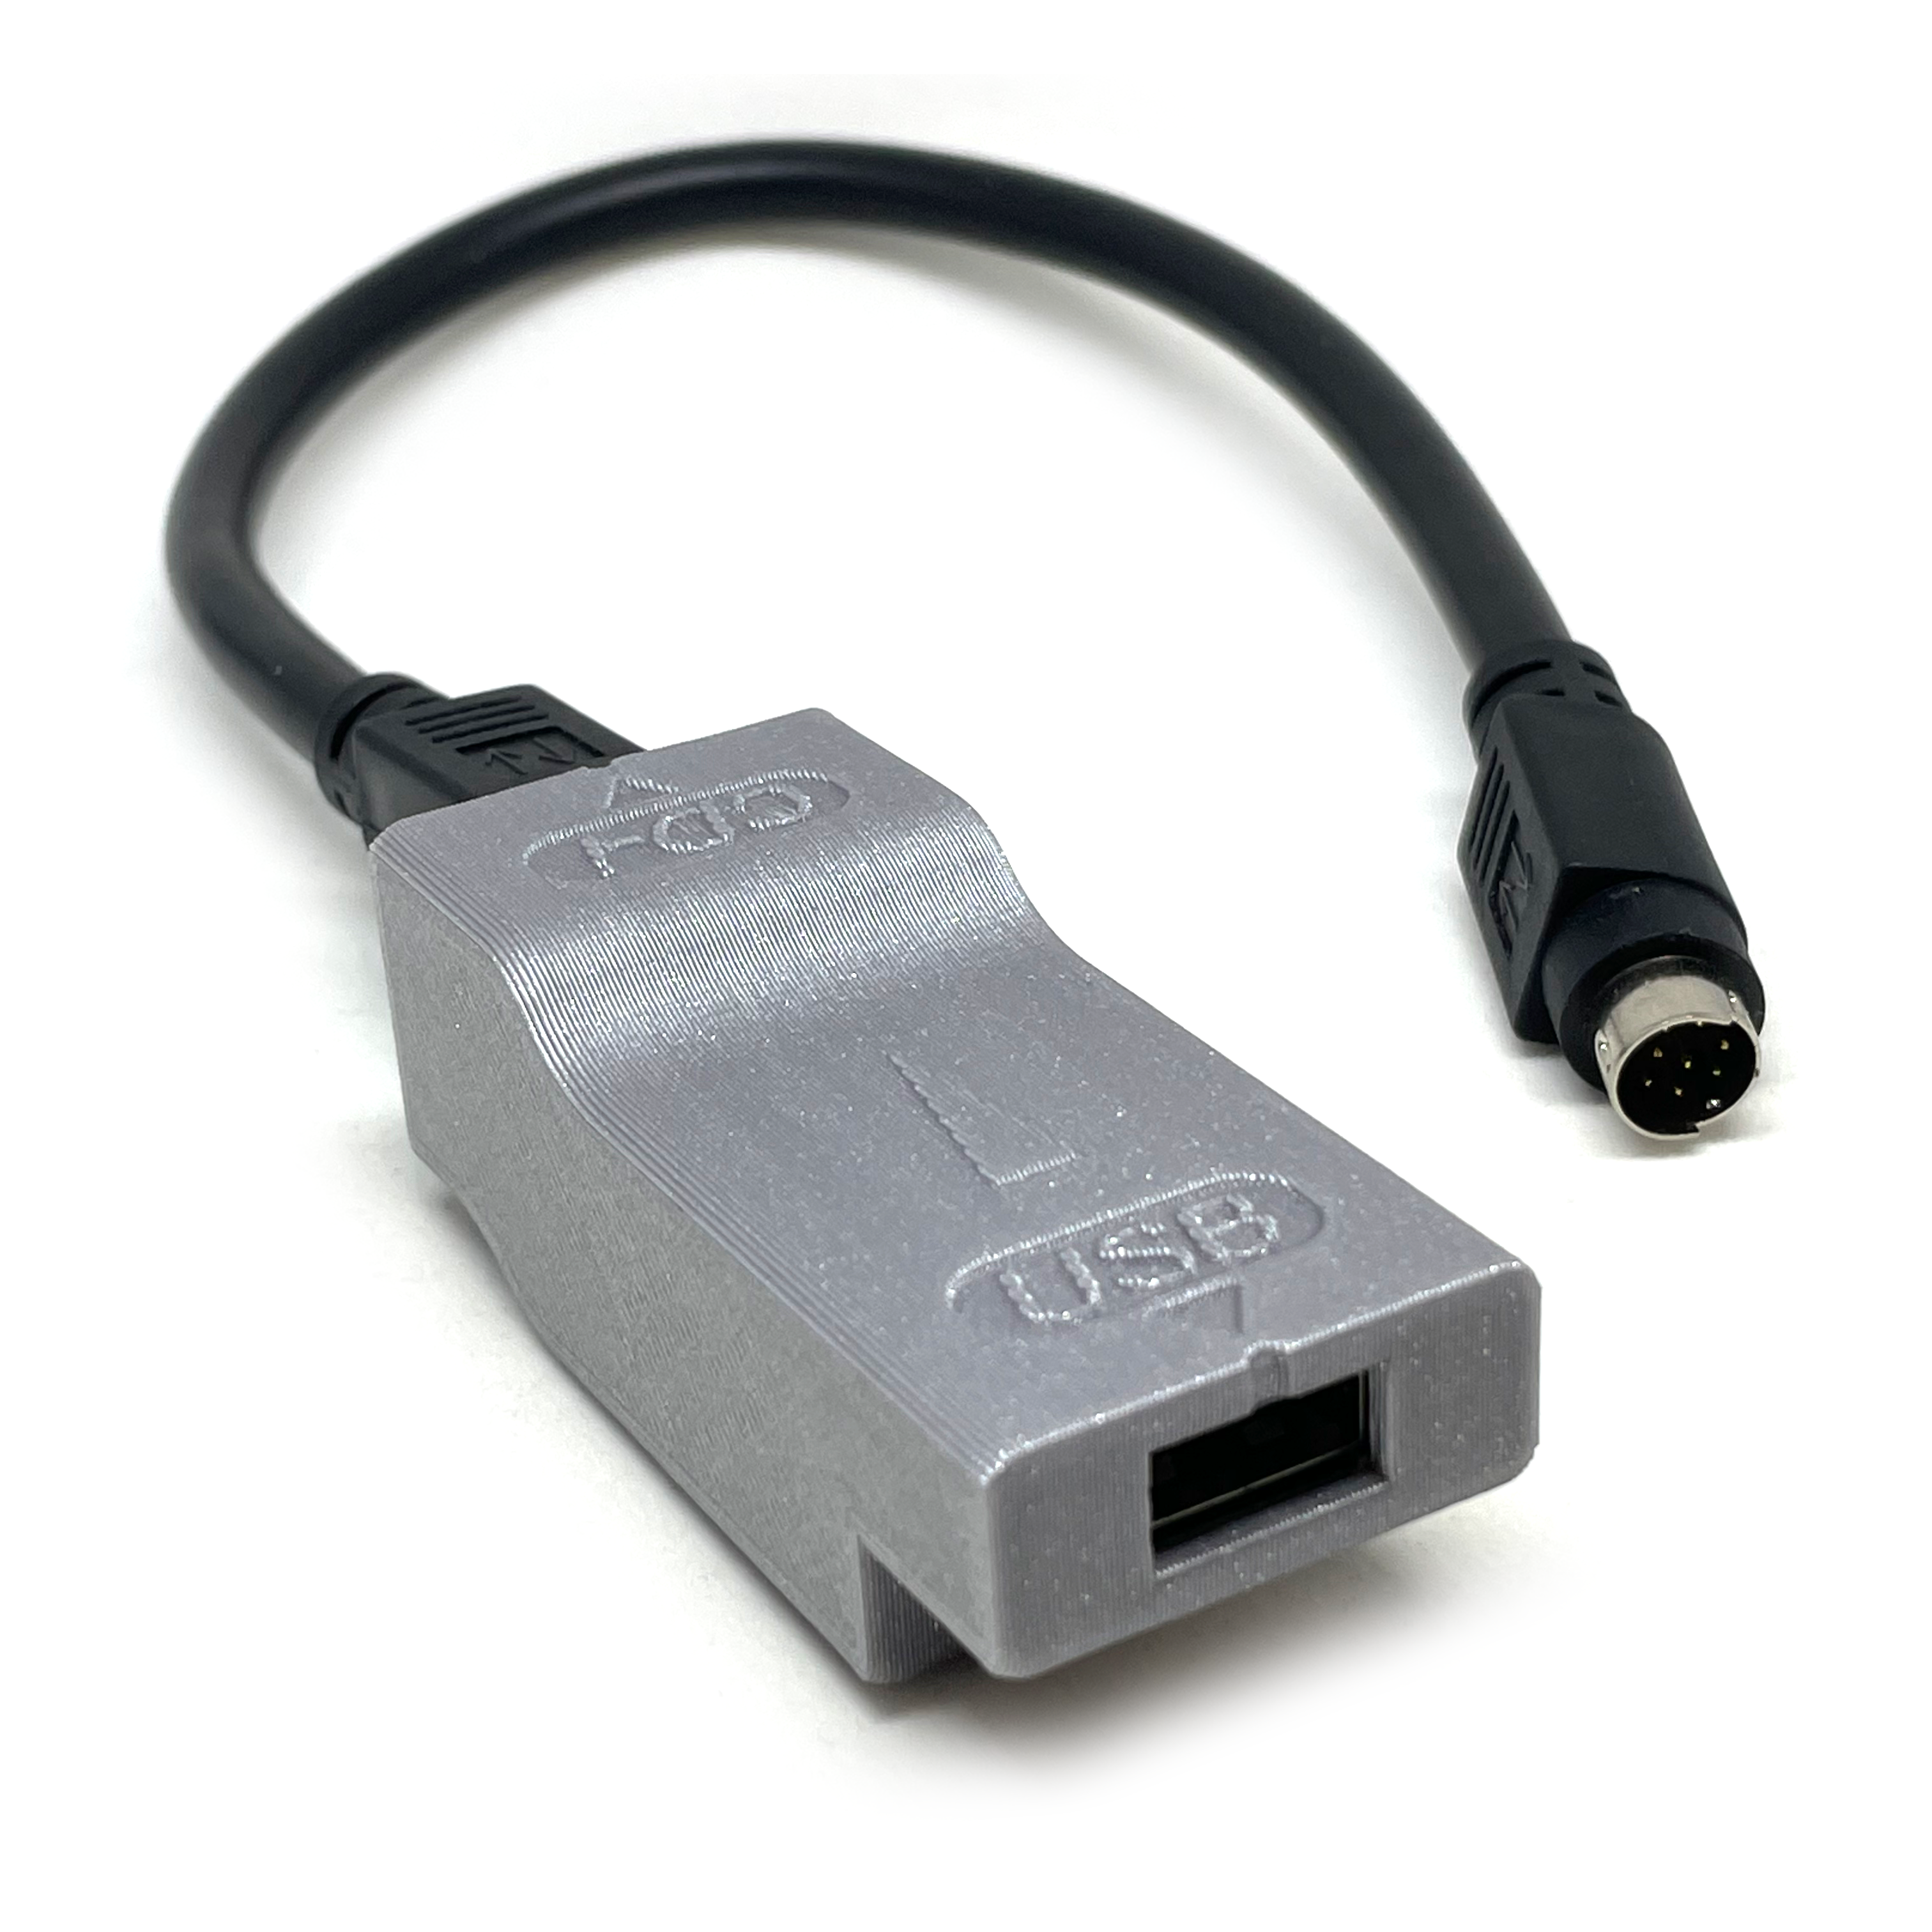 USB to CD-i Controller Adapter (USB2CDI)